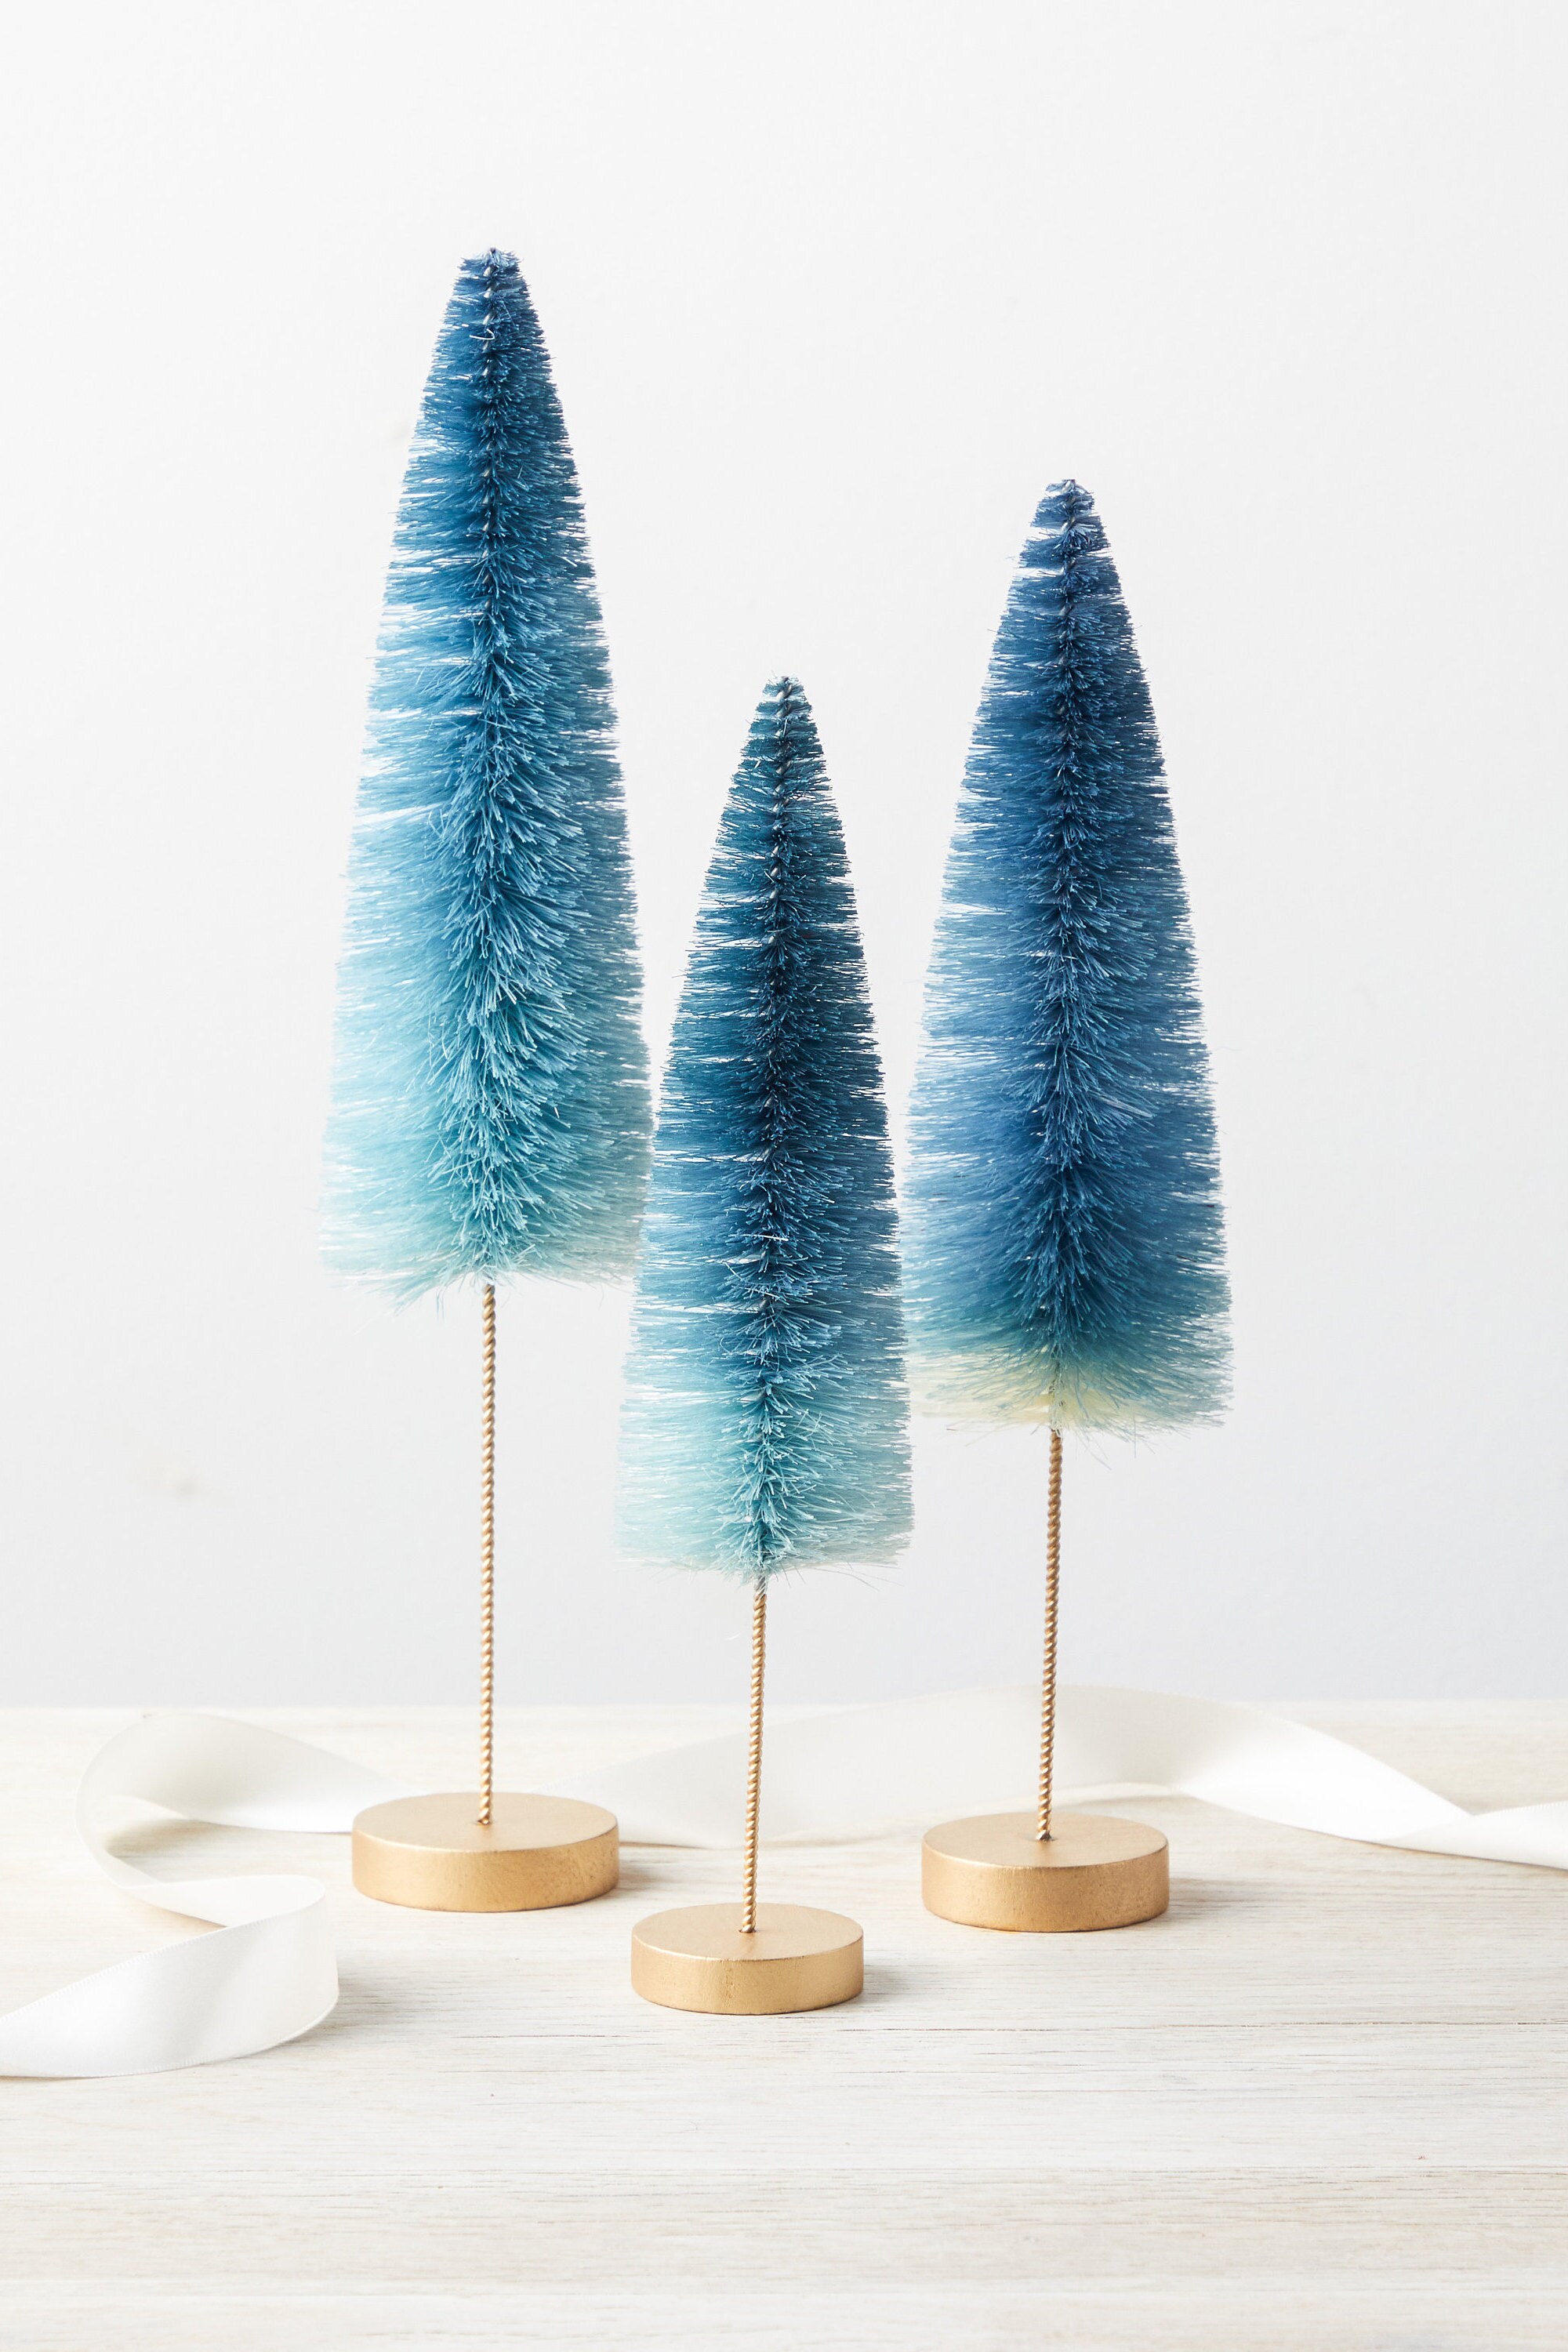 Bottle Brush Trees Set of 6 Classics Hand-dyed, Neutral Home Decor, Wedding  Decor, Holiday Centerpiece, Trending Home Decor, for the Table 